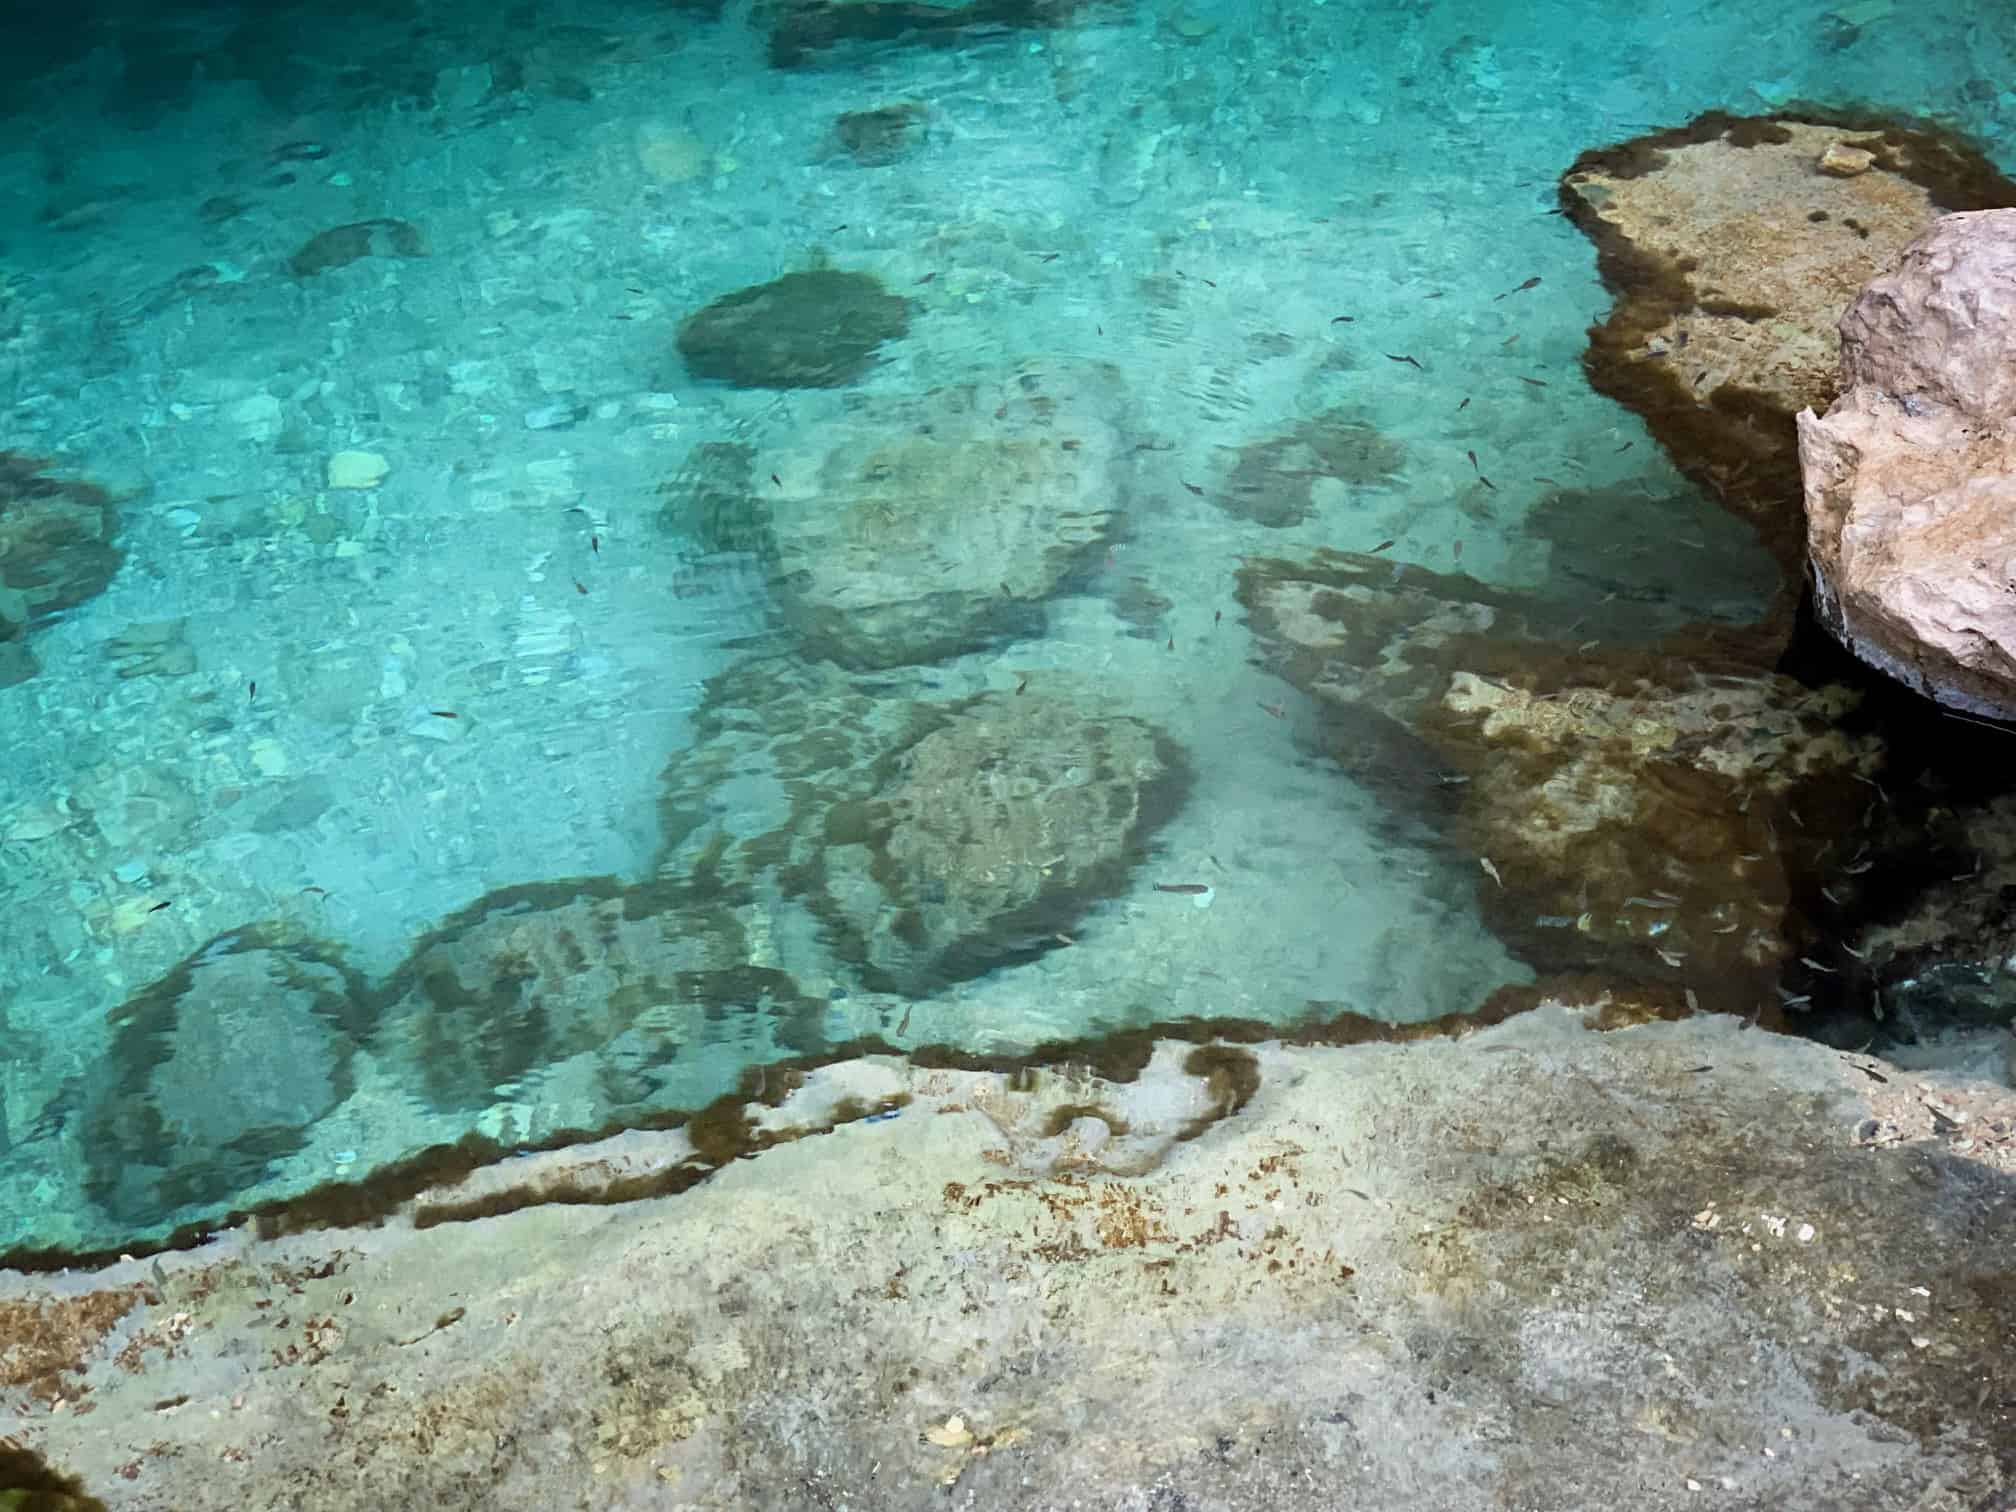 Close up of the fish in the water at Bimmah Sinkhole Oman